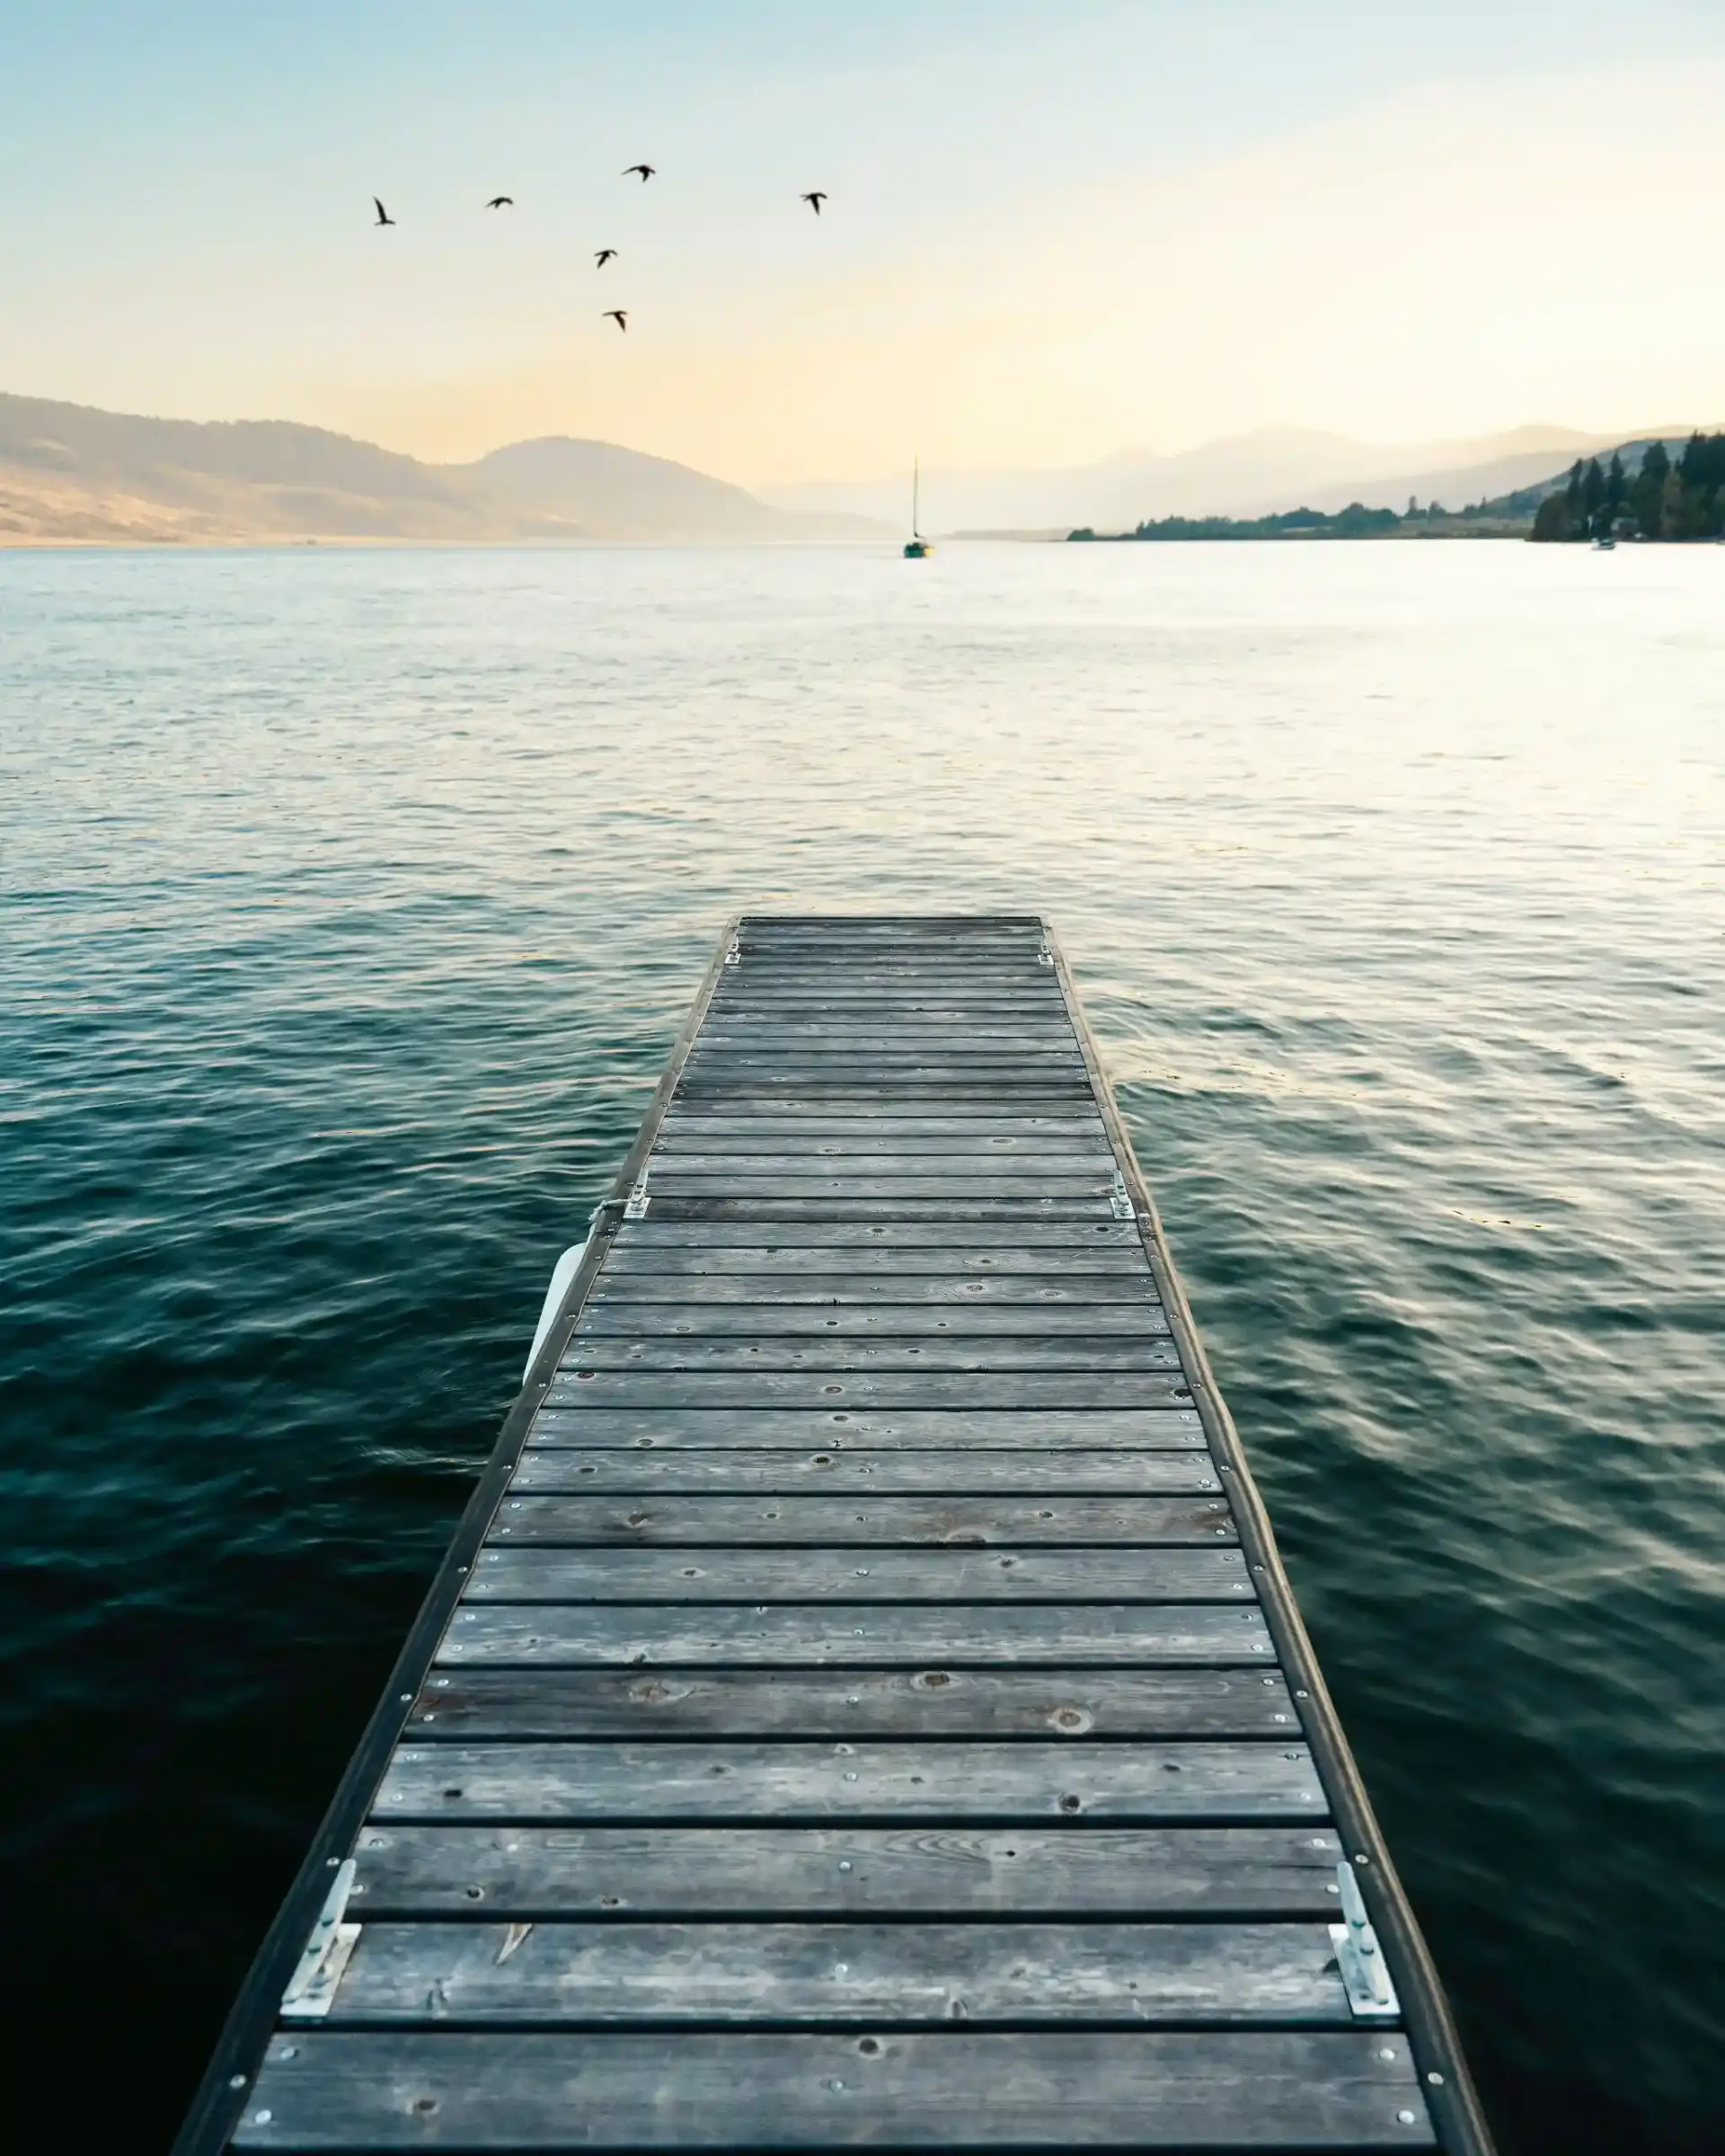 A wooden pier extending into calm waters, with hills in the distance, a sailboat to the right, and birds flying in the sky during early evening.